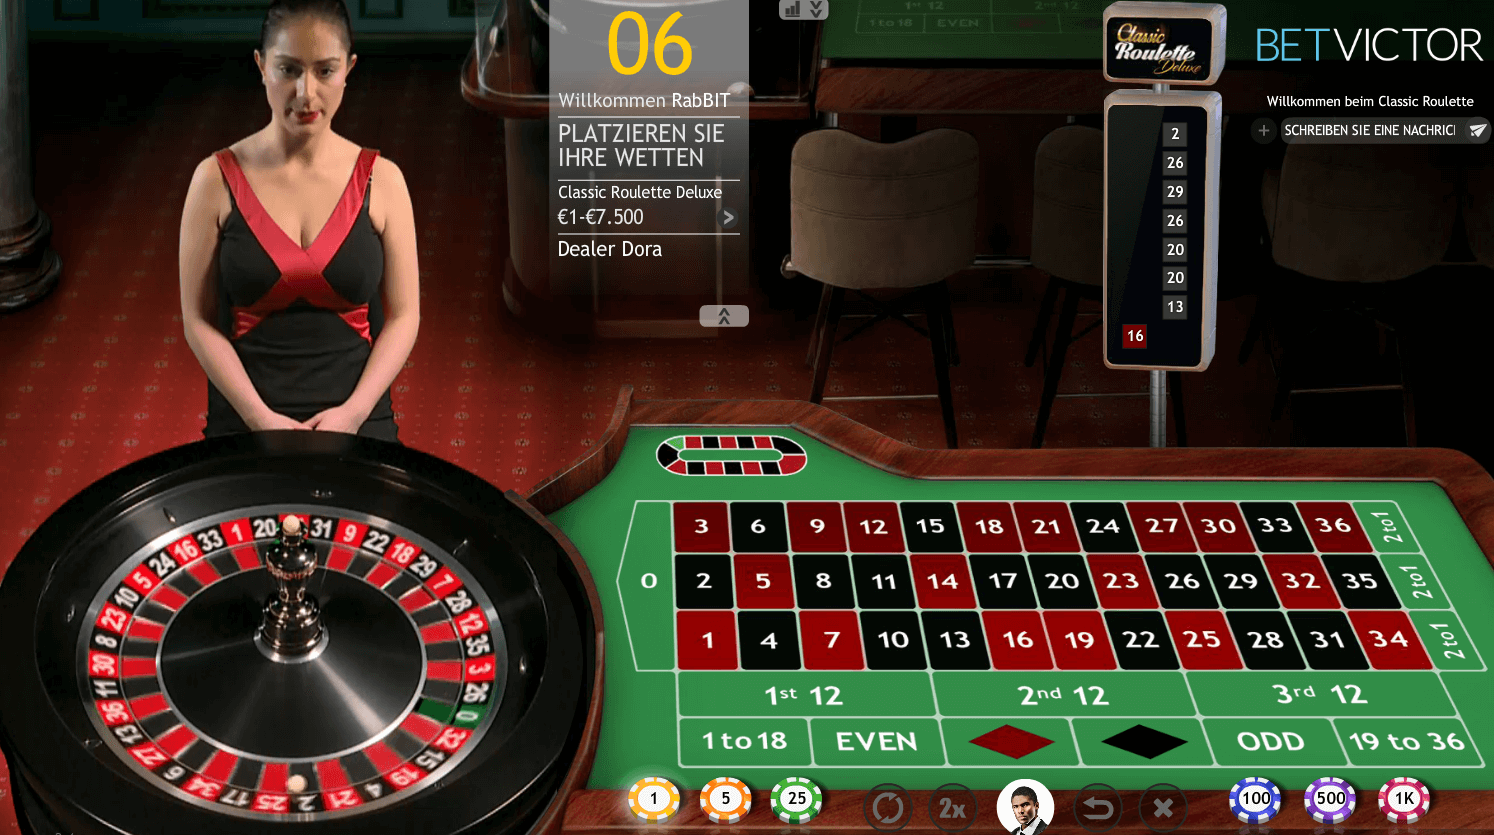 BetVictor Live Roulette